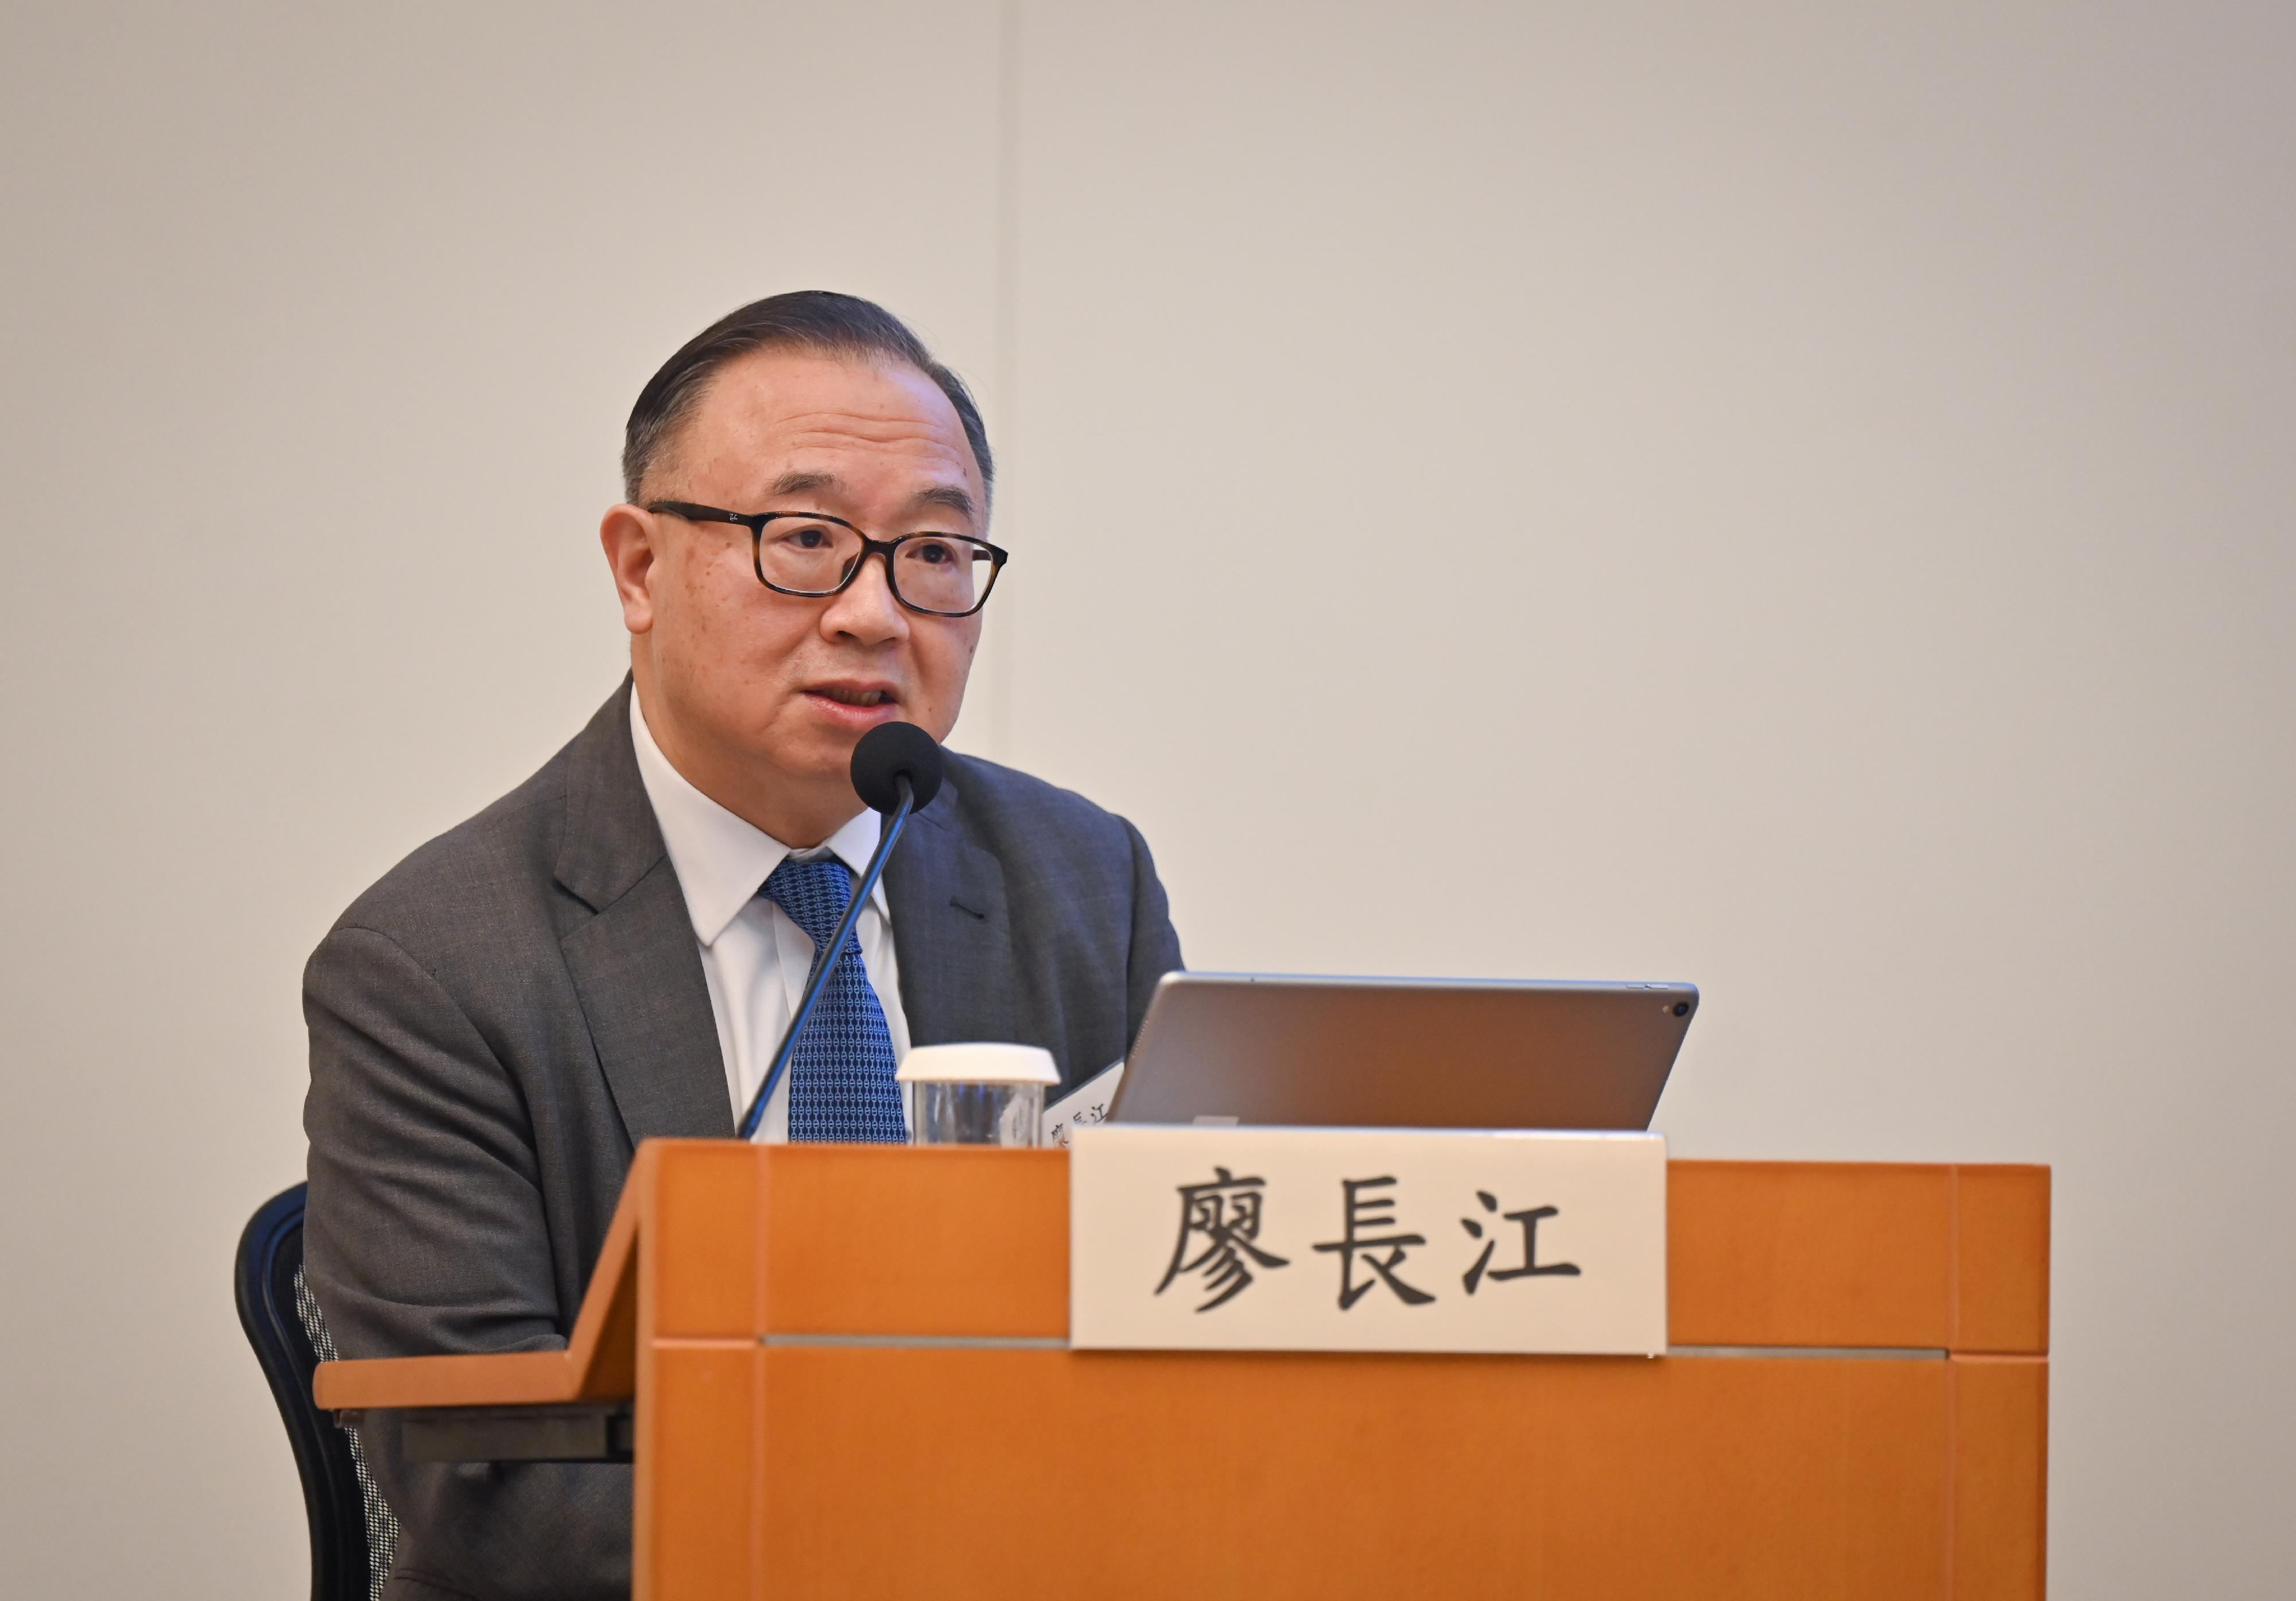 The Hong Kong Special Administrative Region Government today (March 24) held a sharing session on the spirit of "two sessions" at the Central Government Offices. Photo shows Hong Kong member of the Standing Committee of the 14th Chinese People's Political Consultative Conference Mr Martin Liao sharing his views.